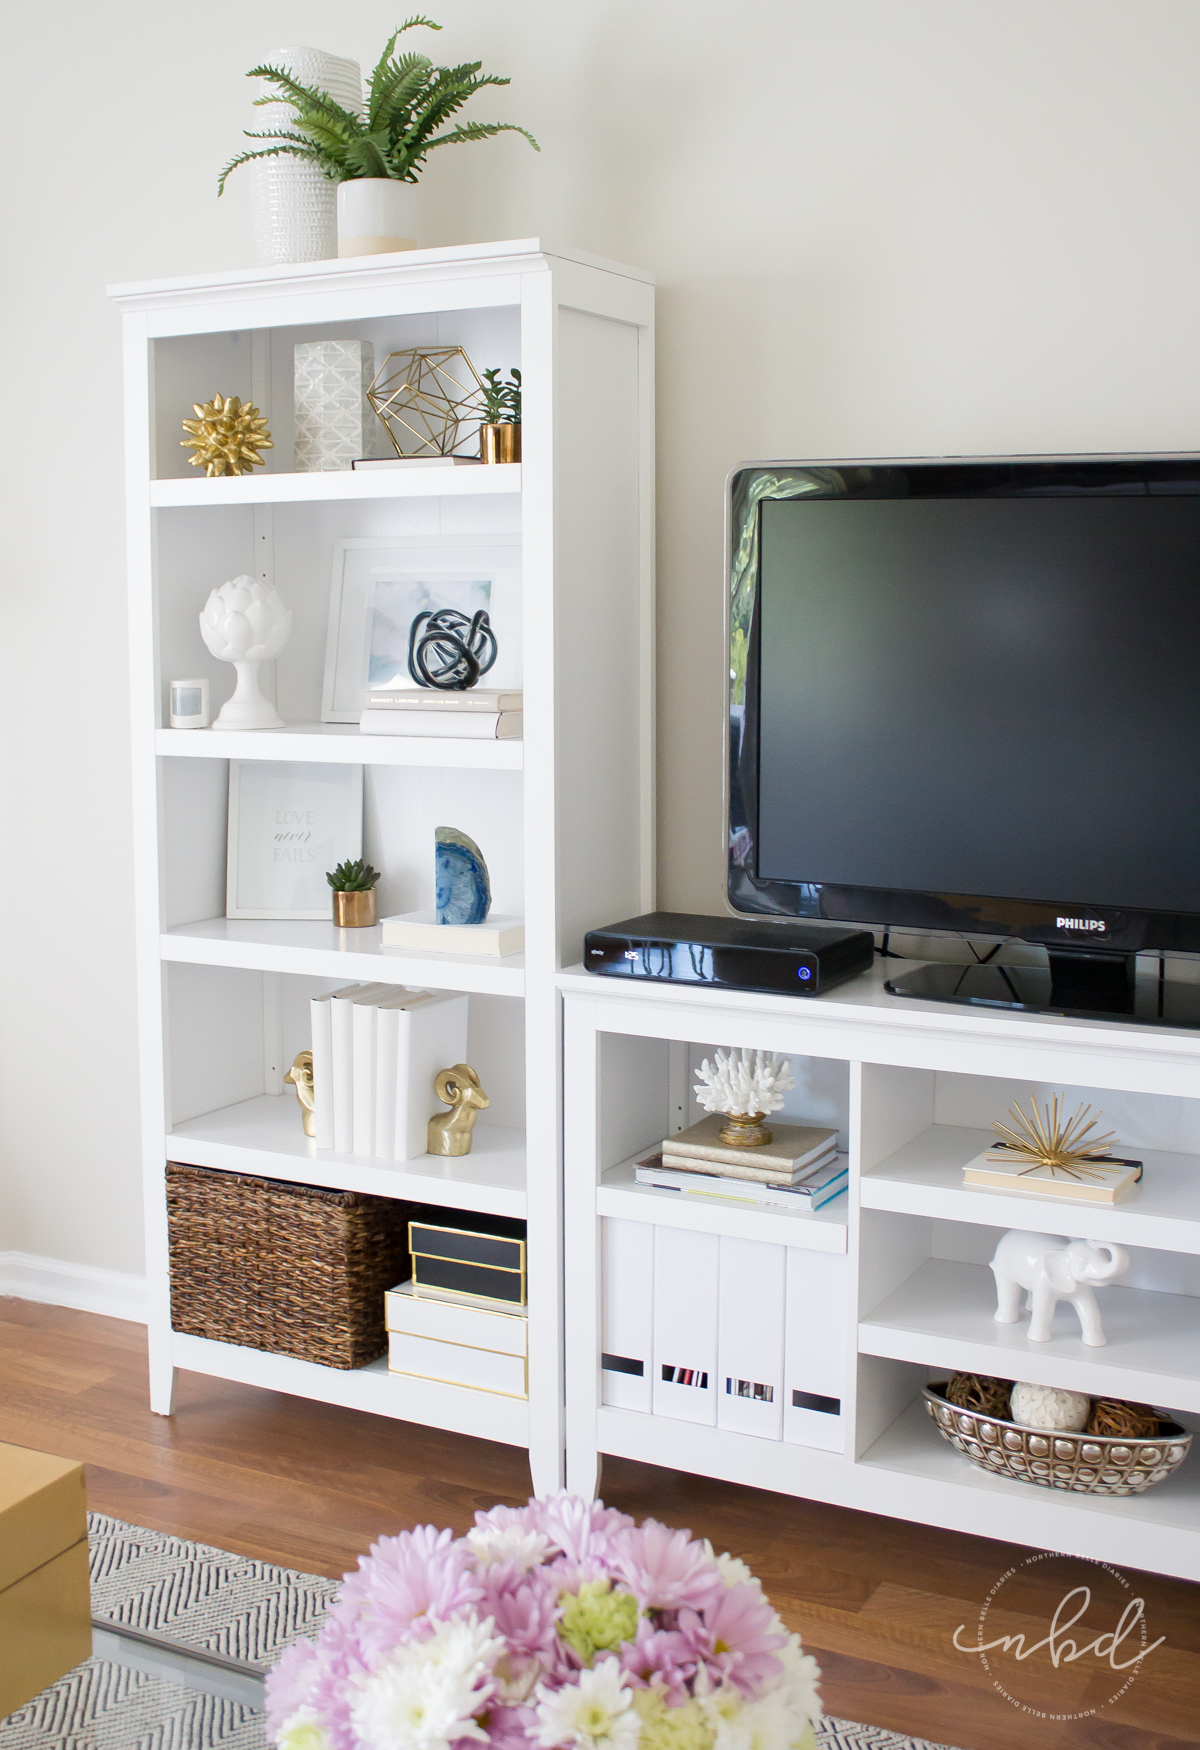 Have you ever stared at gorgeous bookshelves on Pinterest and wondered how to recreate the look in your own home? Here's the secret to styling bookshelves! #bookshelfstylingclass #decor